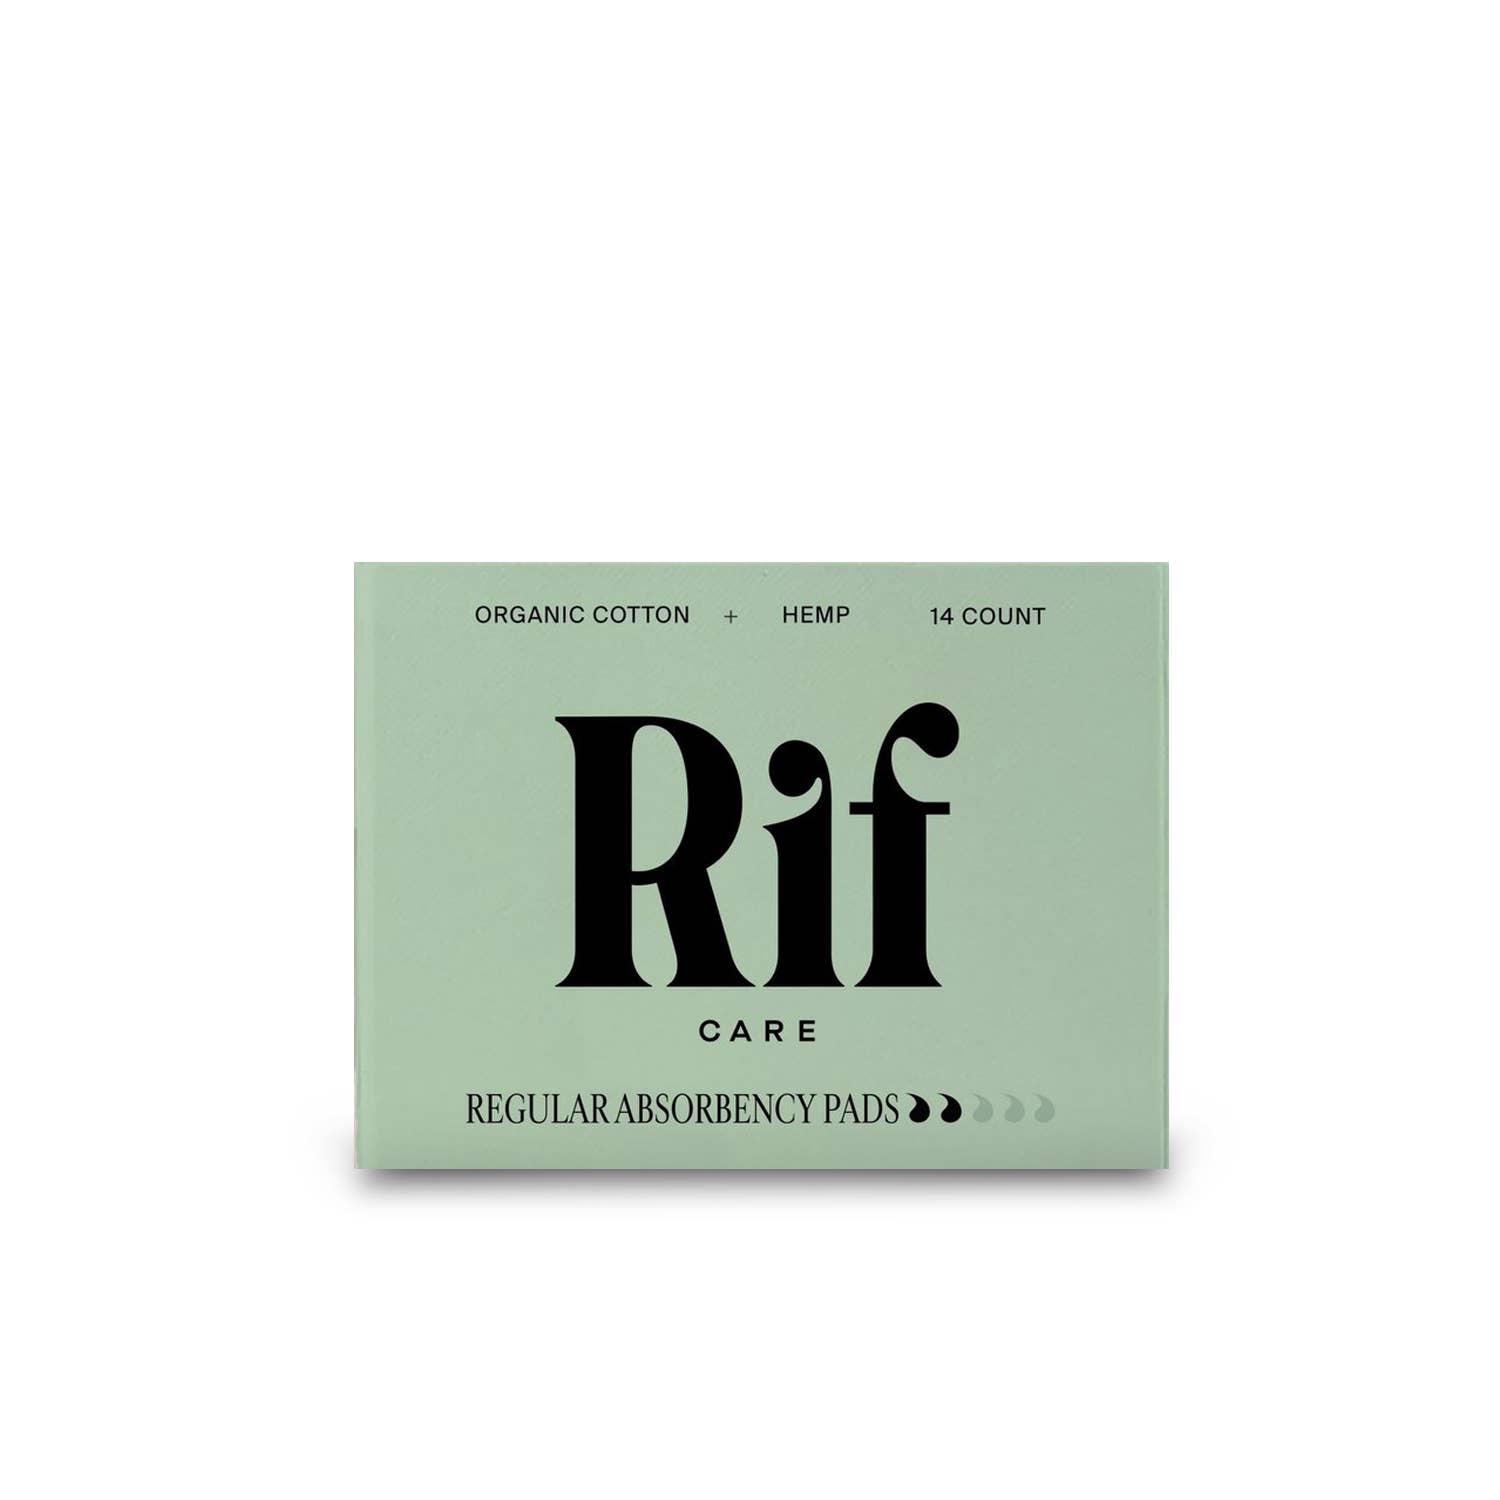 Rif Care wholesale products